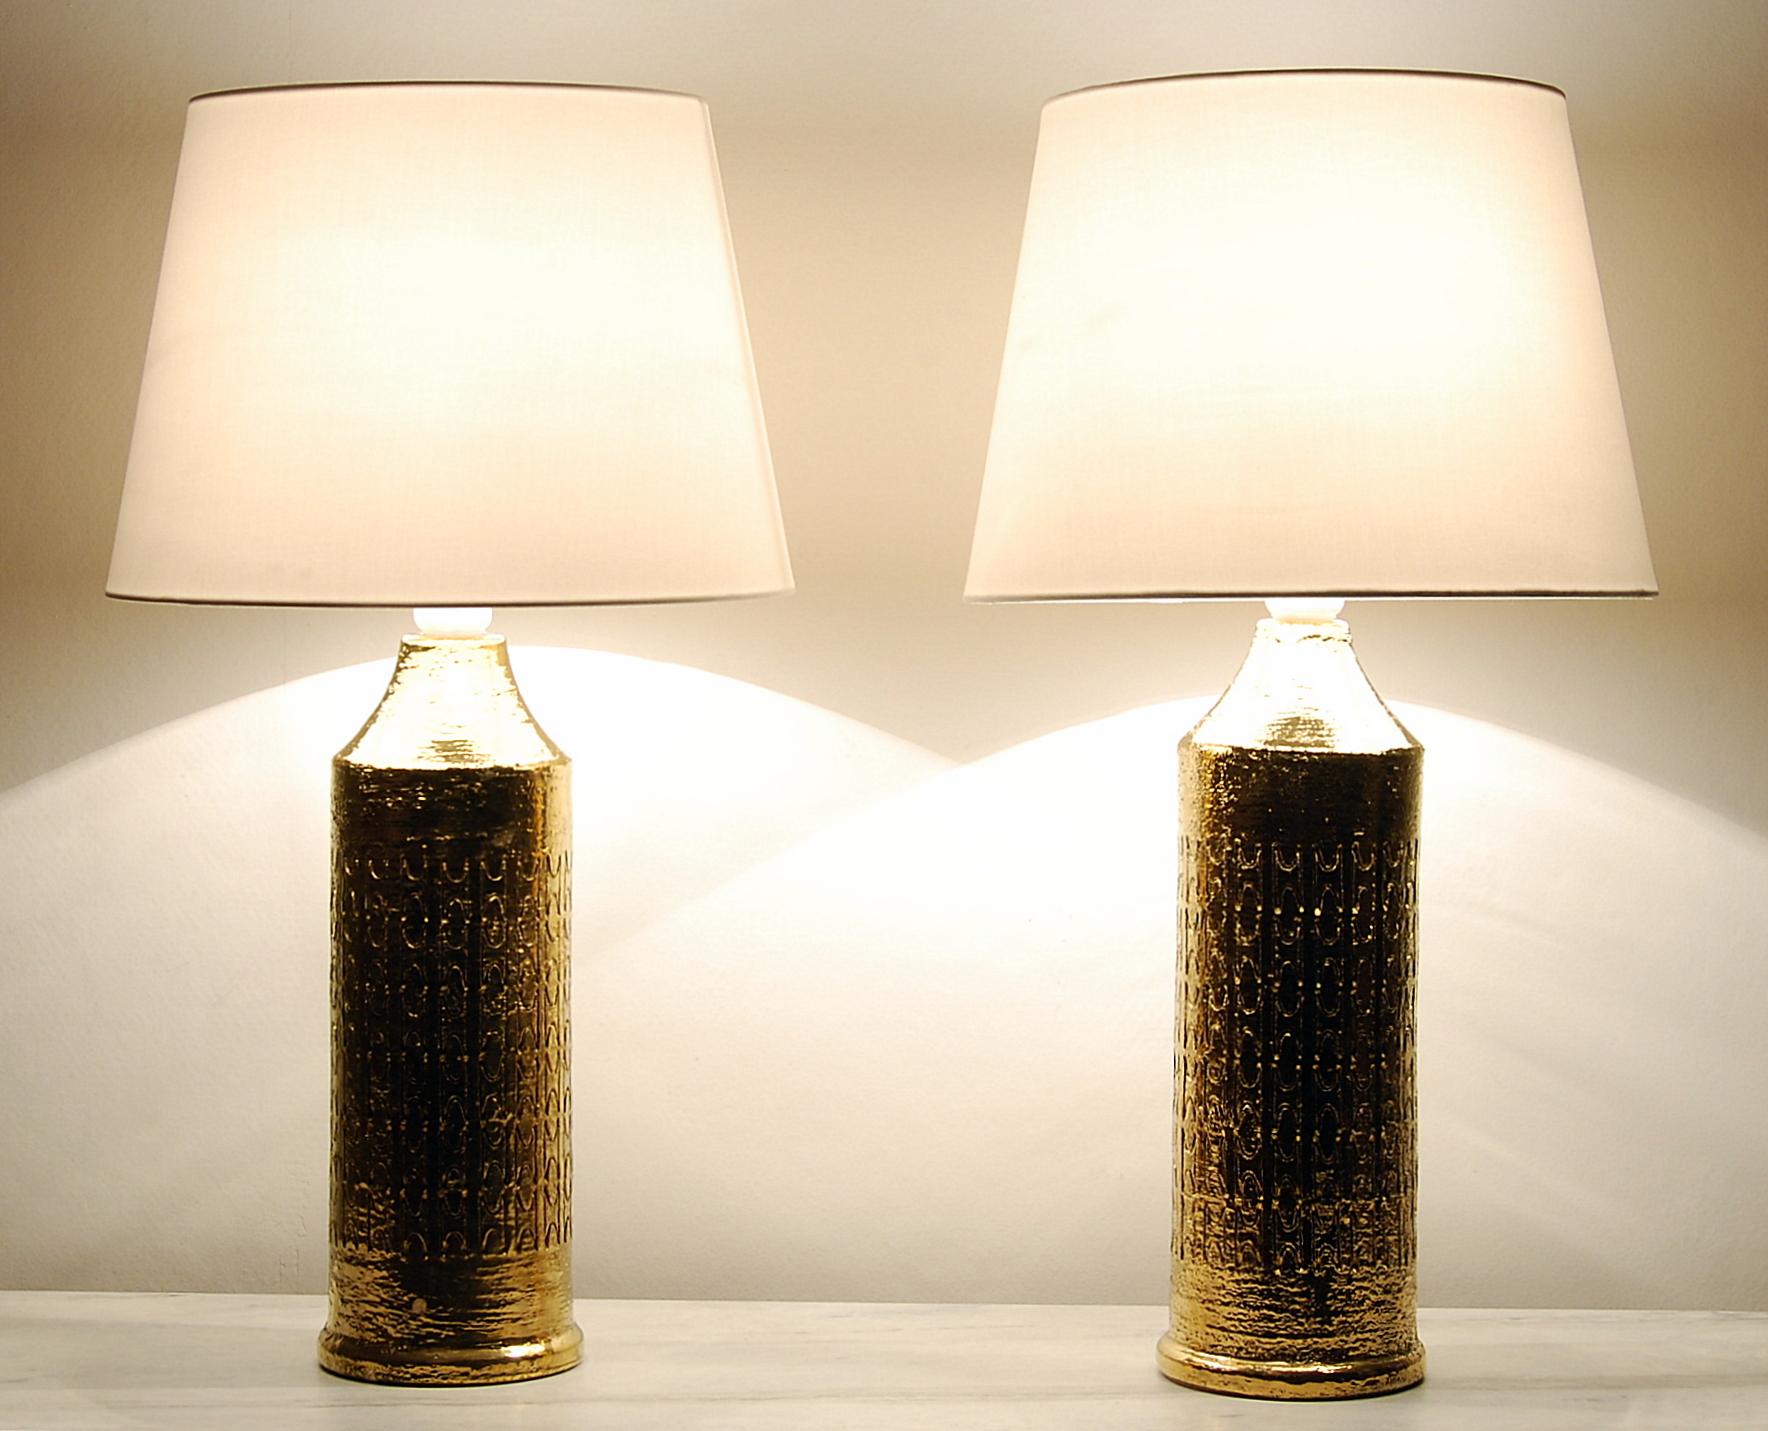 Mid-Century Modern Pair of Bitossi Table Lamps by Aldo Londi, Gold Glazed Ceramic, Signed